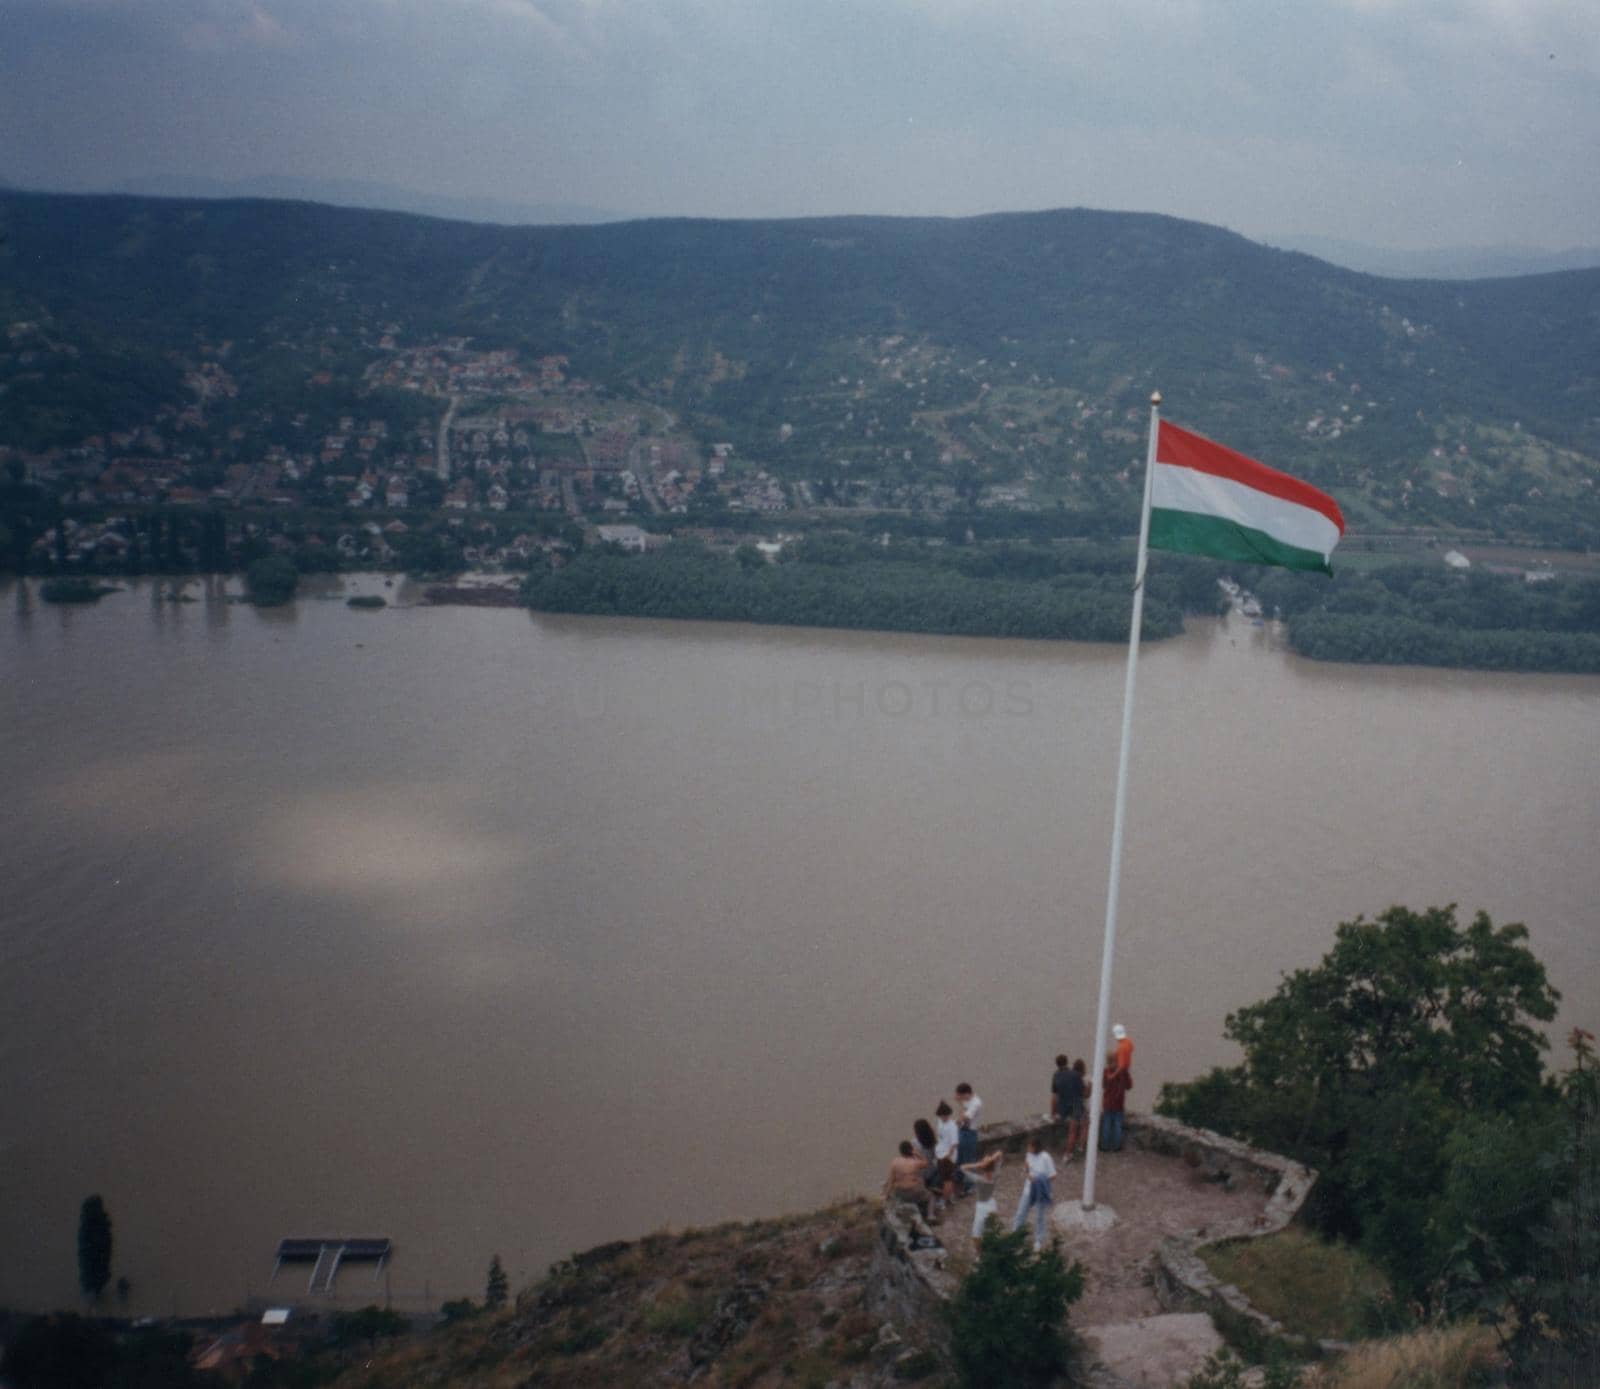 Hungary 1979, View over the Danube in Budapest by pippocarlot